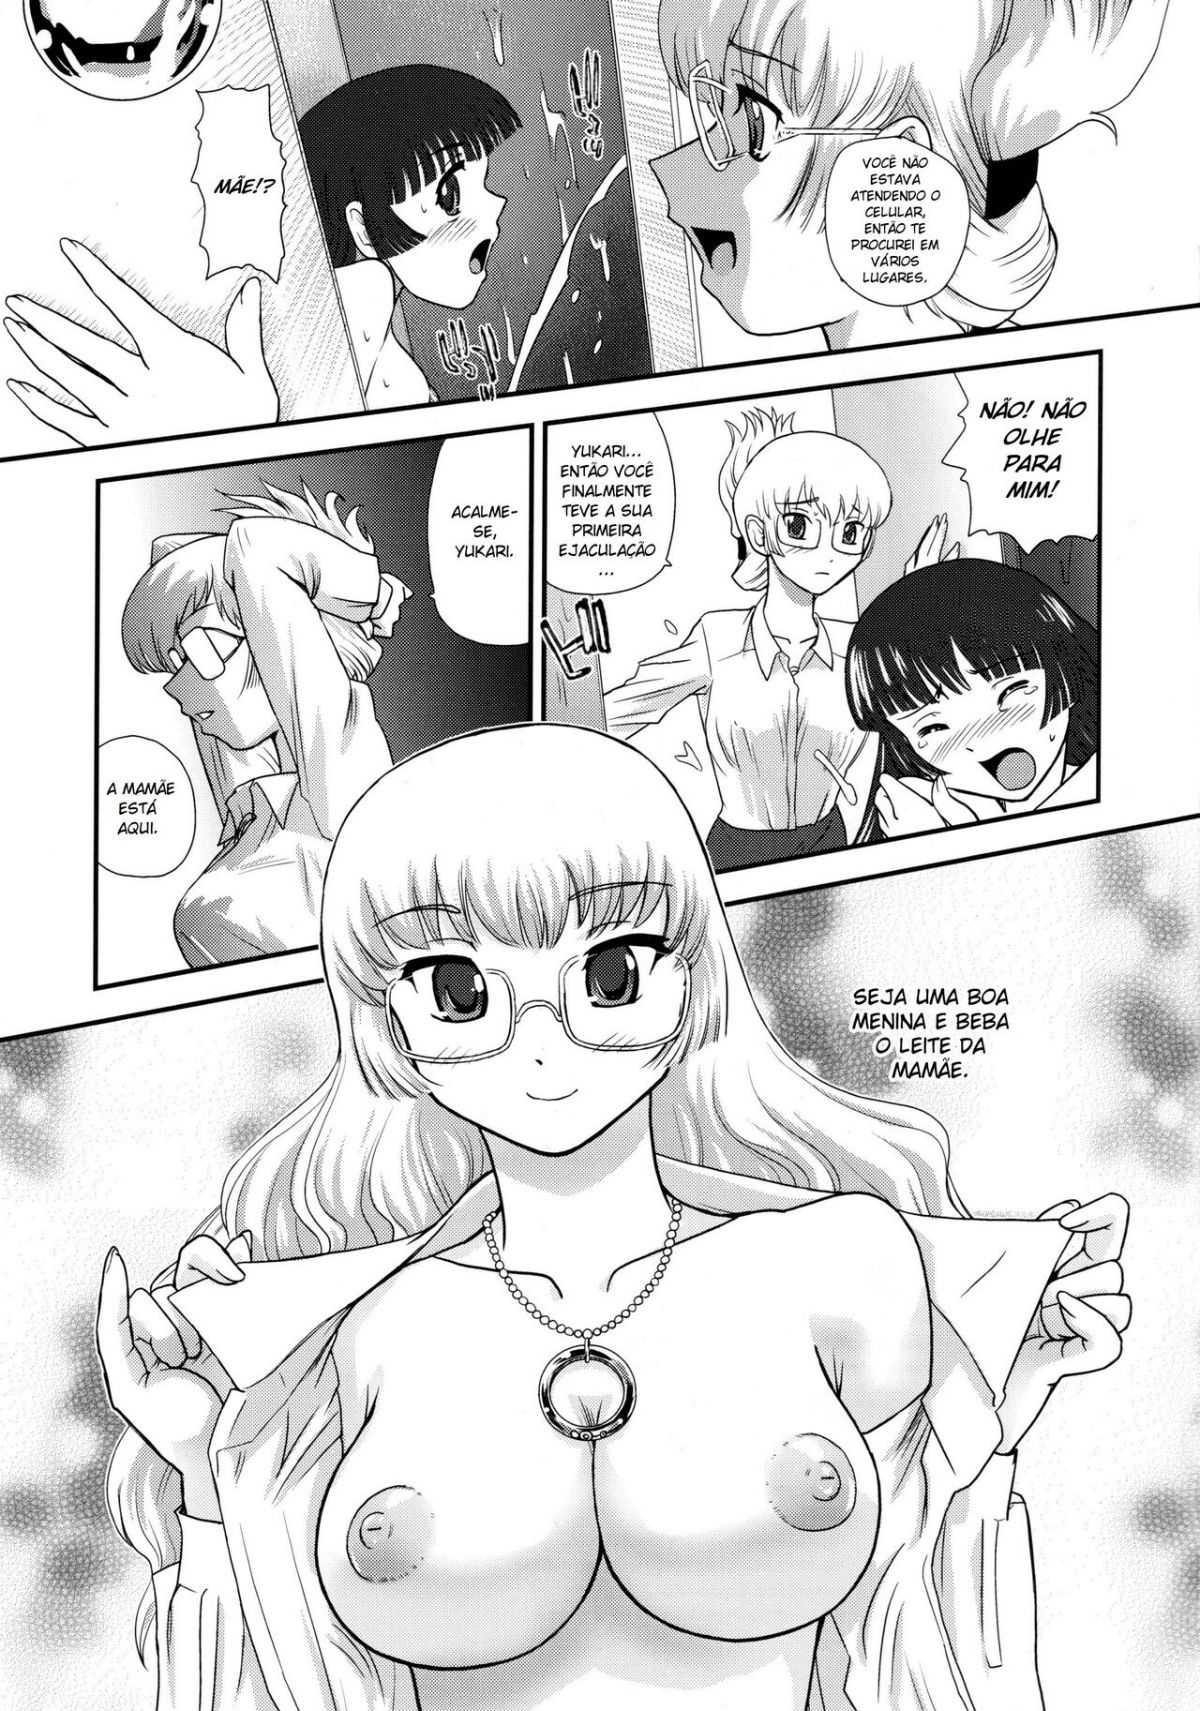 Dulce Report part 1 Hentai pt-br 34